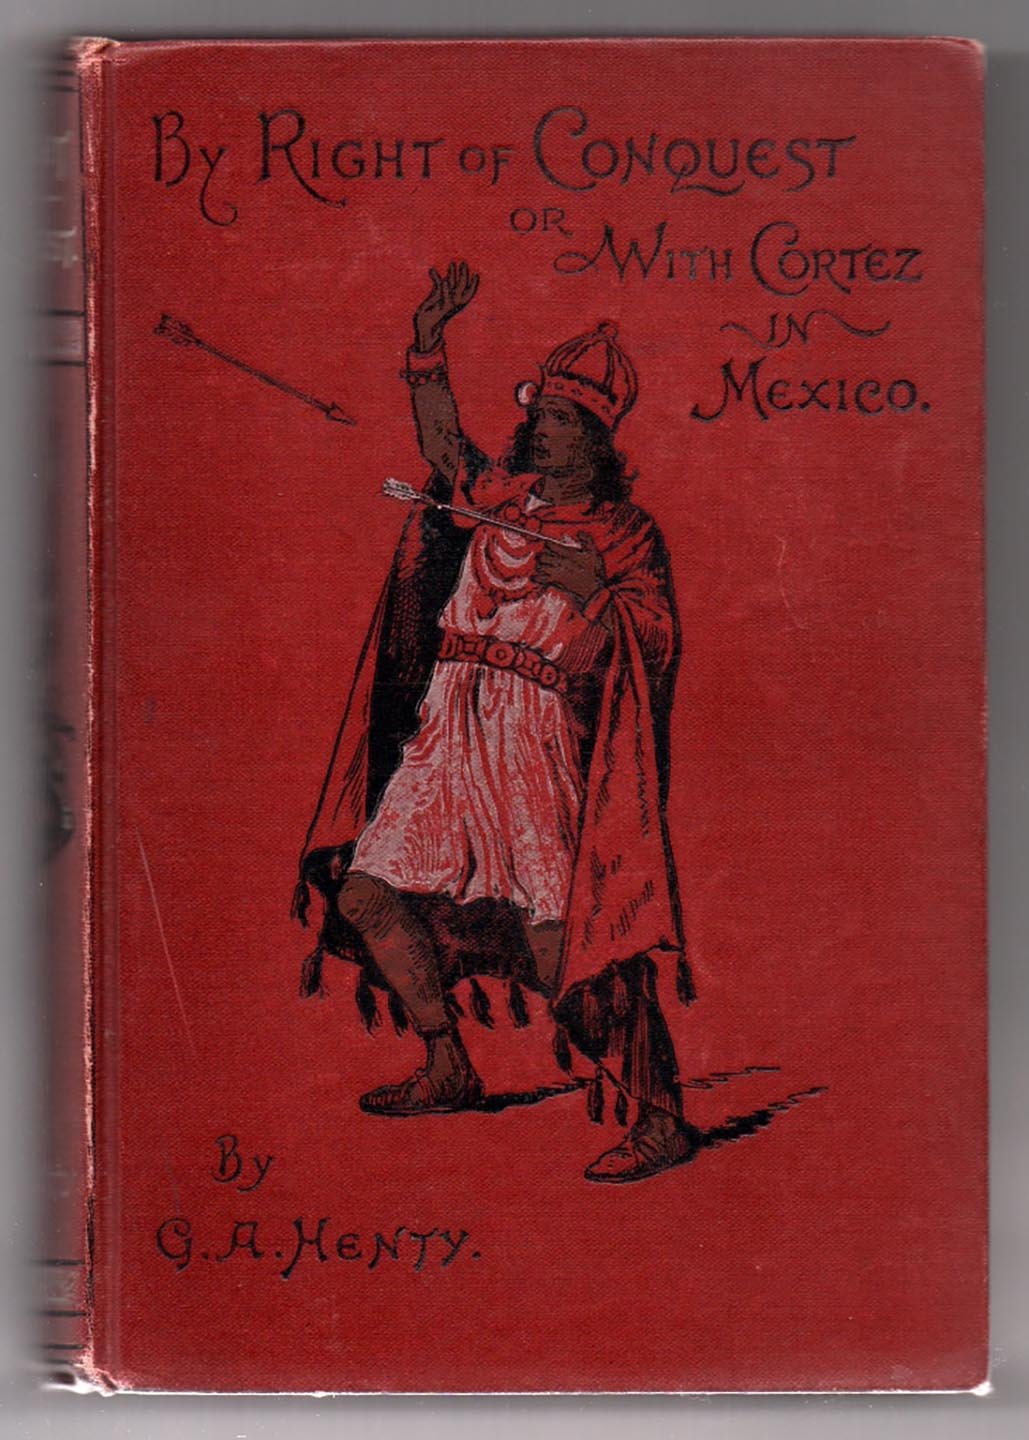 By Right of Conquest or With Cortez in Mexico